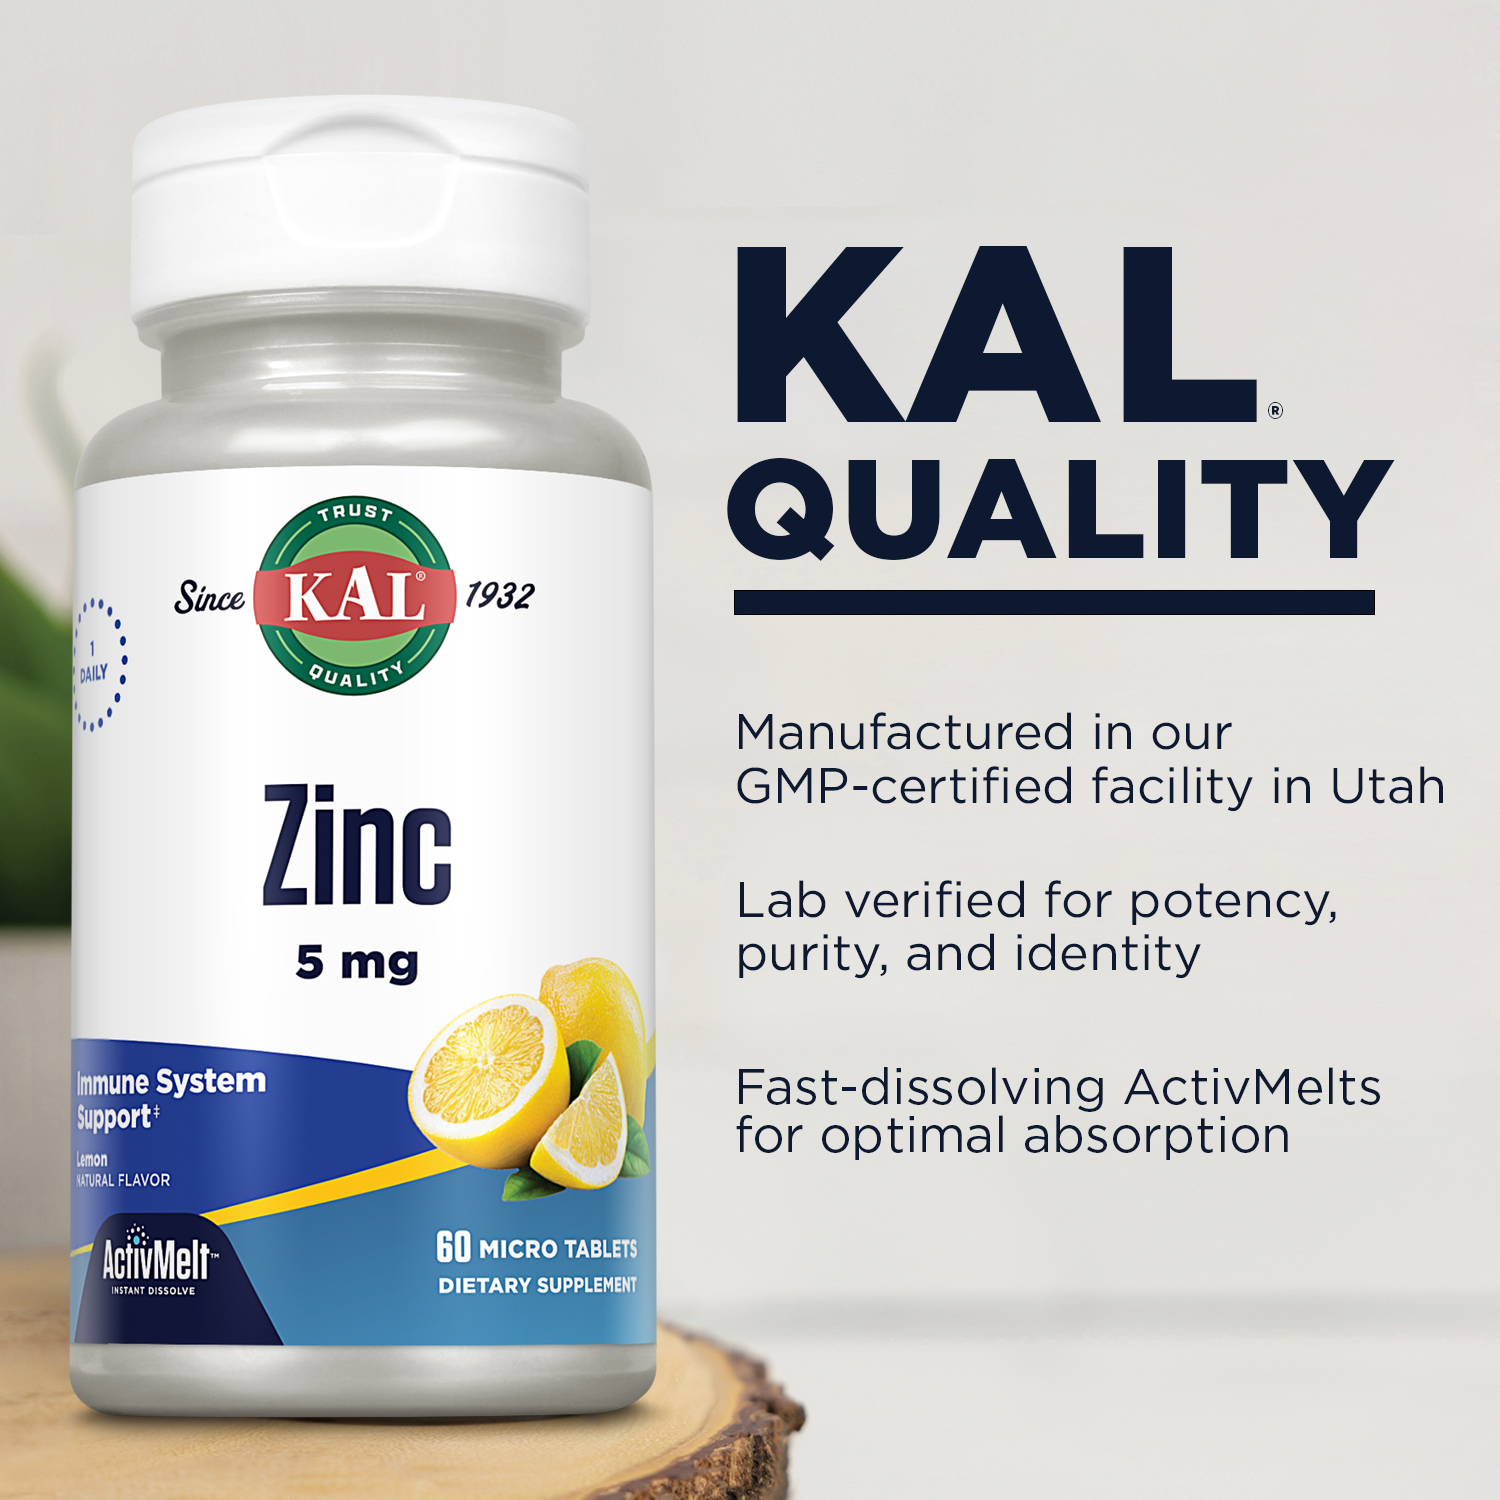 KAL Zinc 5 mg ActivMelt | Sweet Lemon Flavor | Healthy Protein Synthesis, Growth, Taste Acuity & Immune System Function Support | 60 Micro Tablets - image 4 of 6